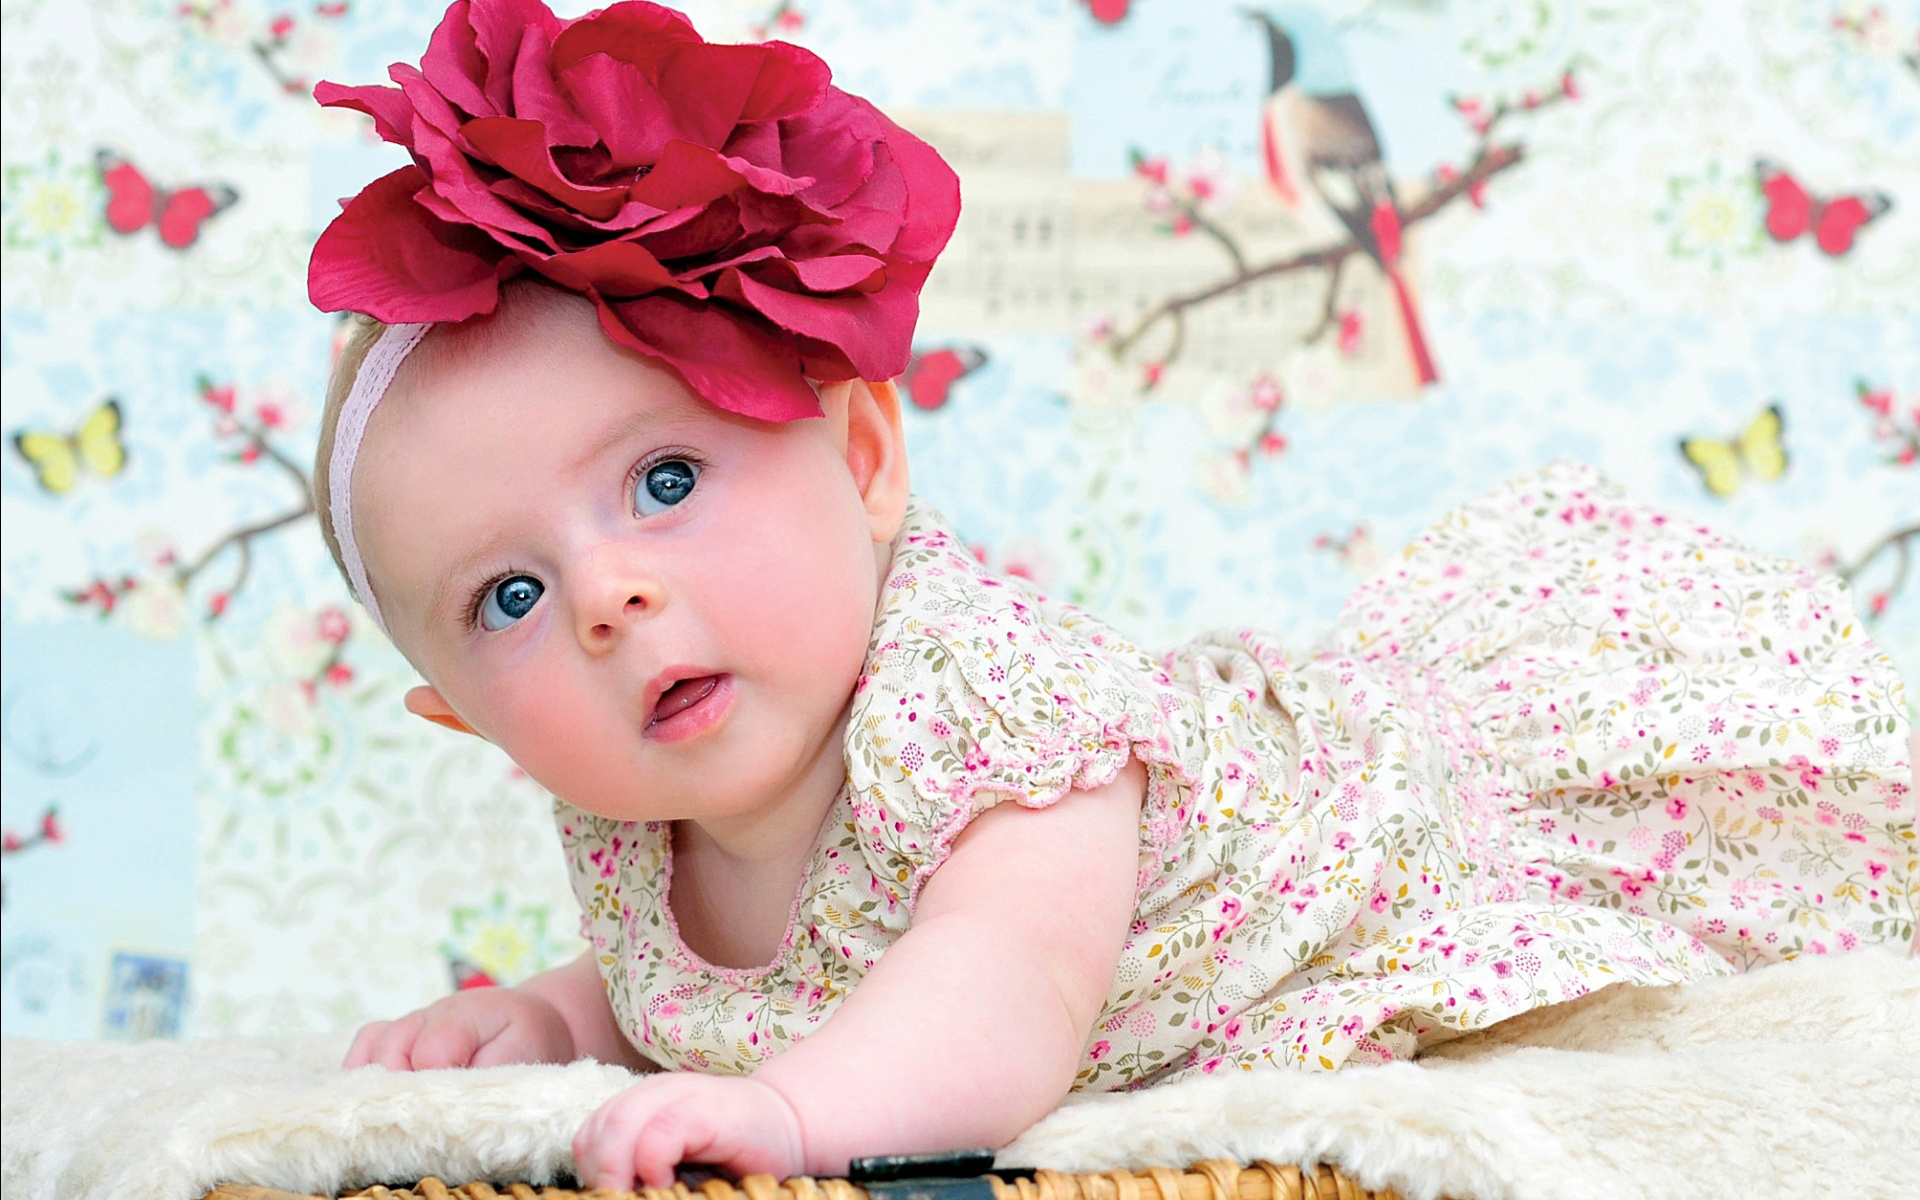 Cute Baby Girl Wallpaper Cool Pictures 6om8053a Yoanu